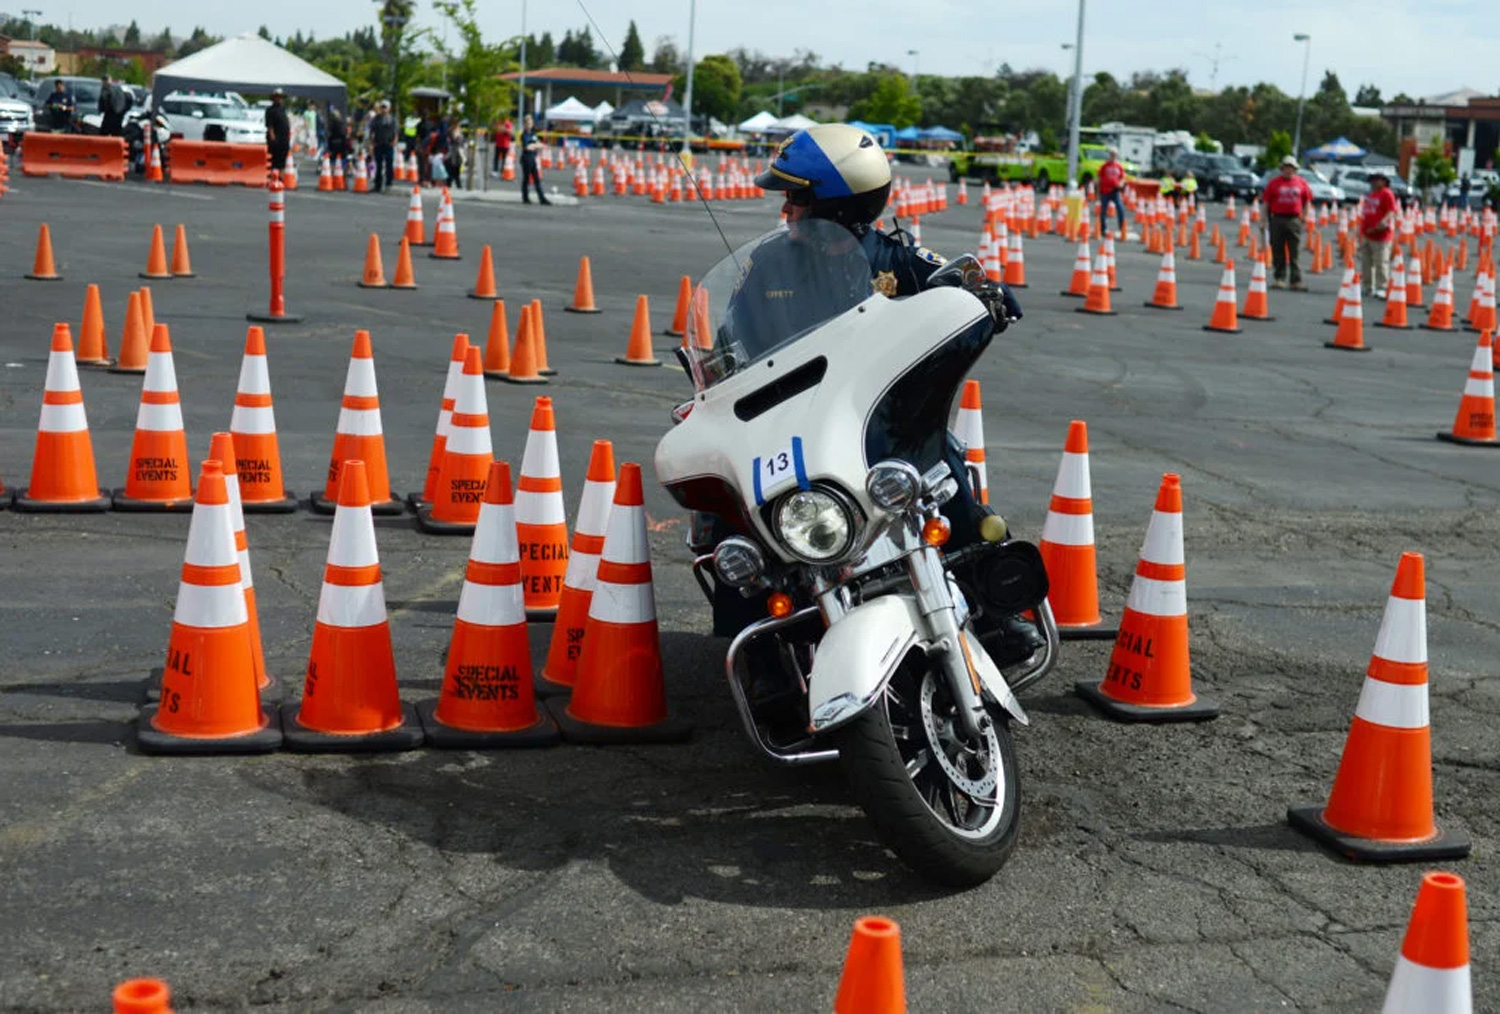 A motorcycle policeman competes in a gymkhana event in a car park